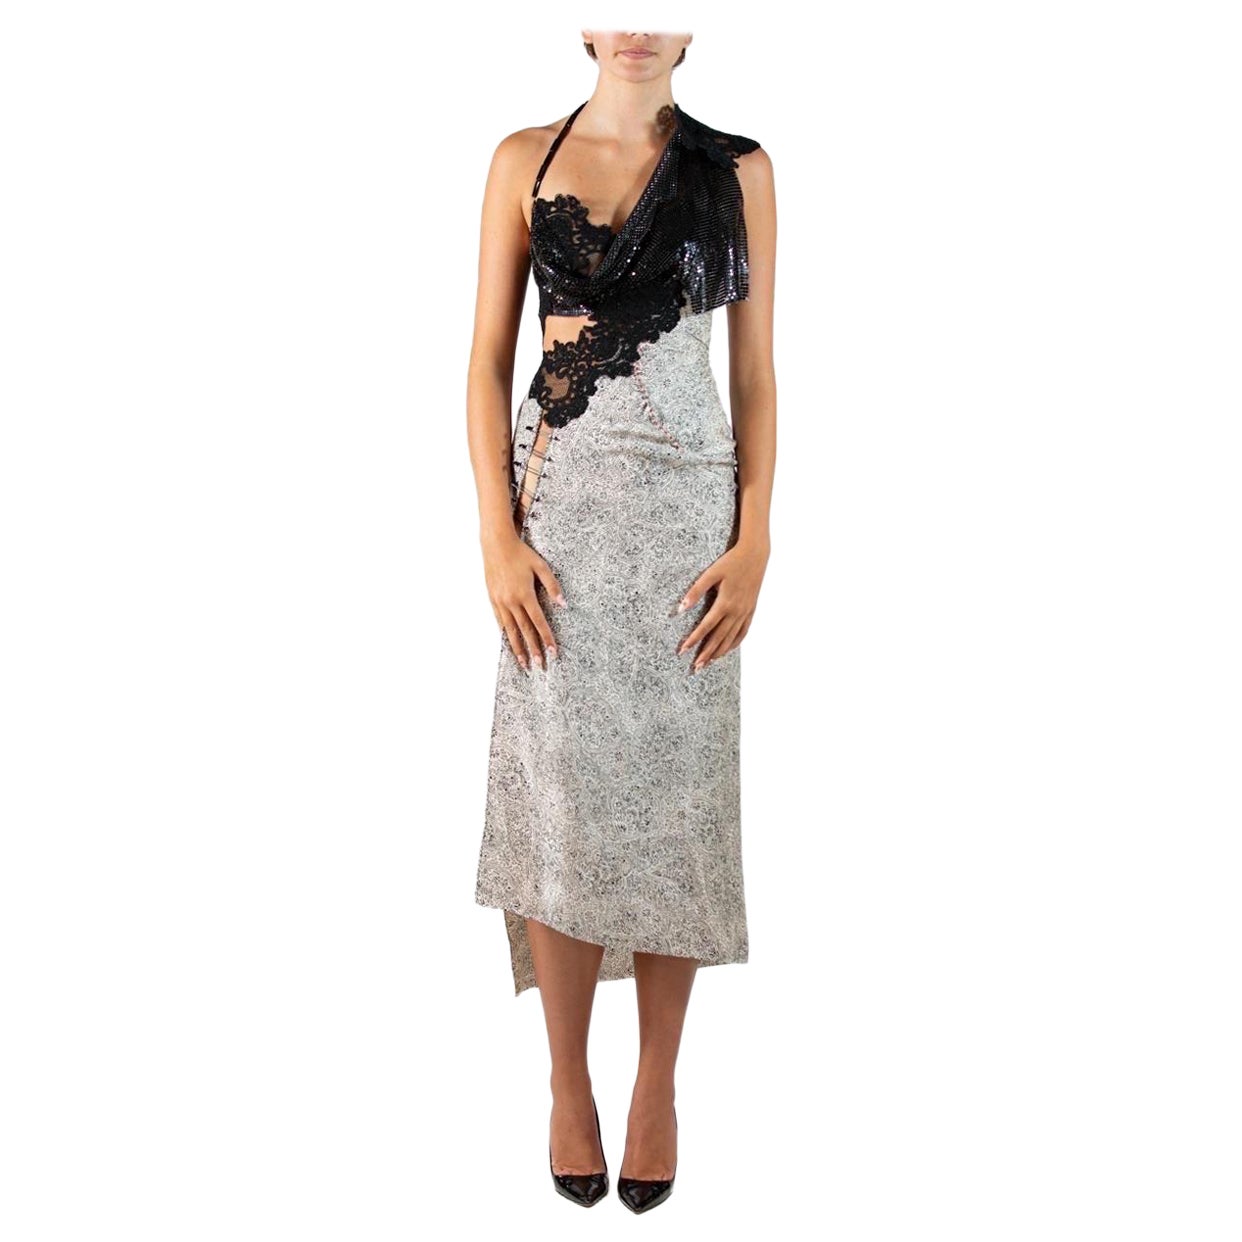 Morphew Atelier Black & White Silk Jacquard Cocktail Dress With Lace Metal Mesh For Sale